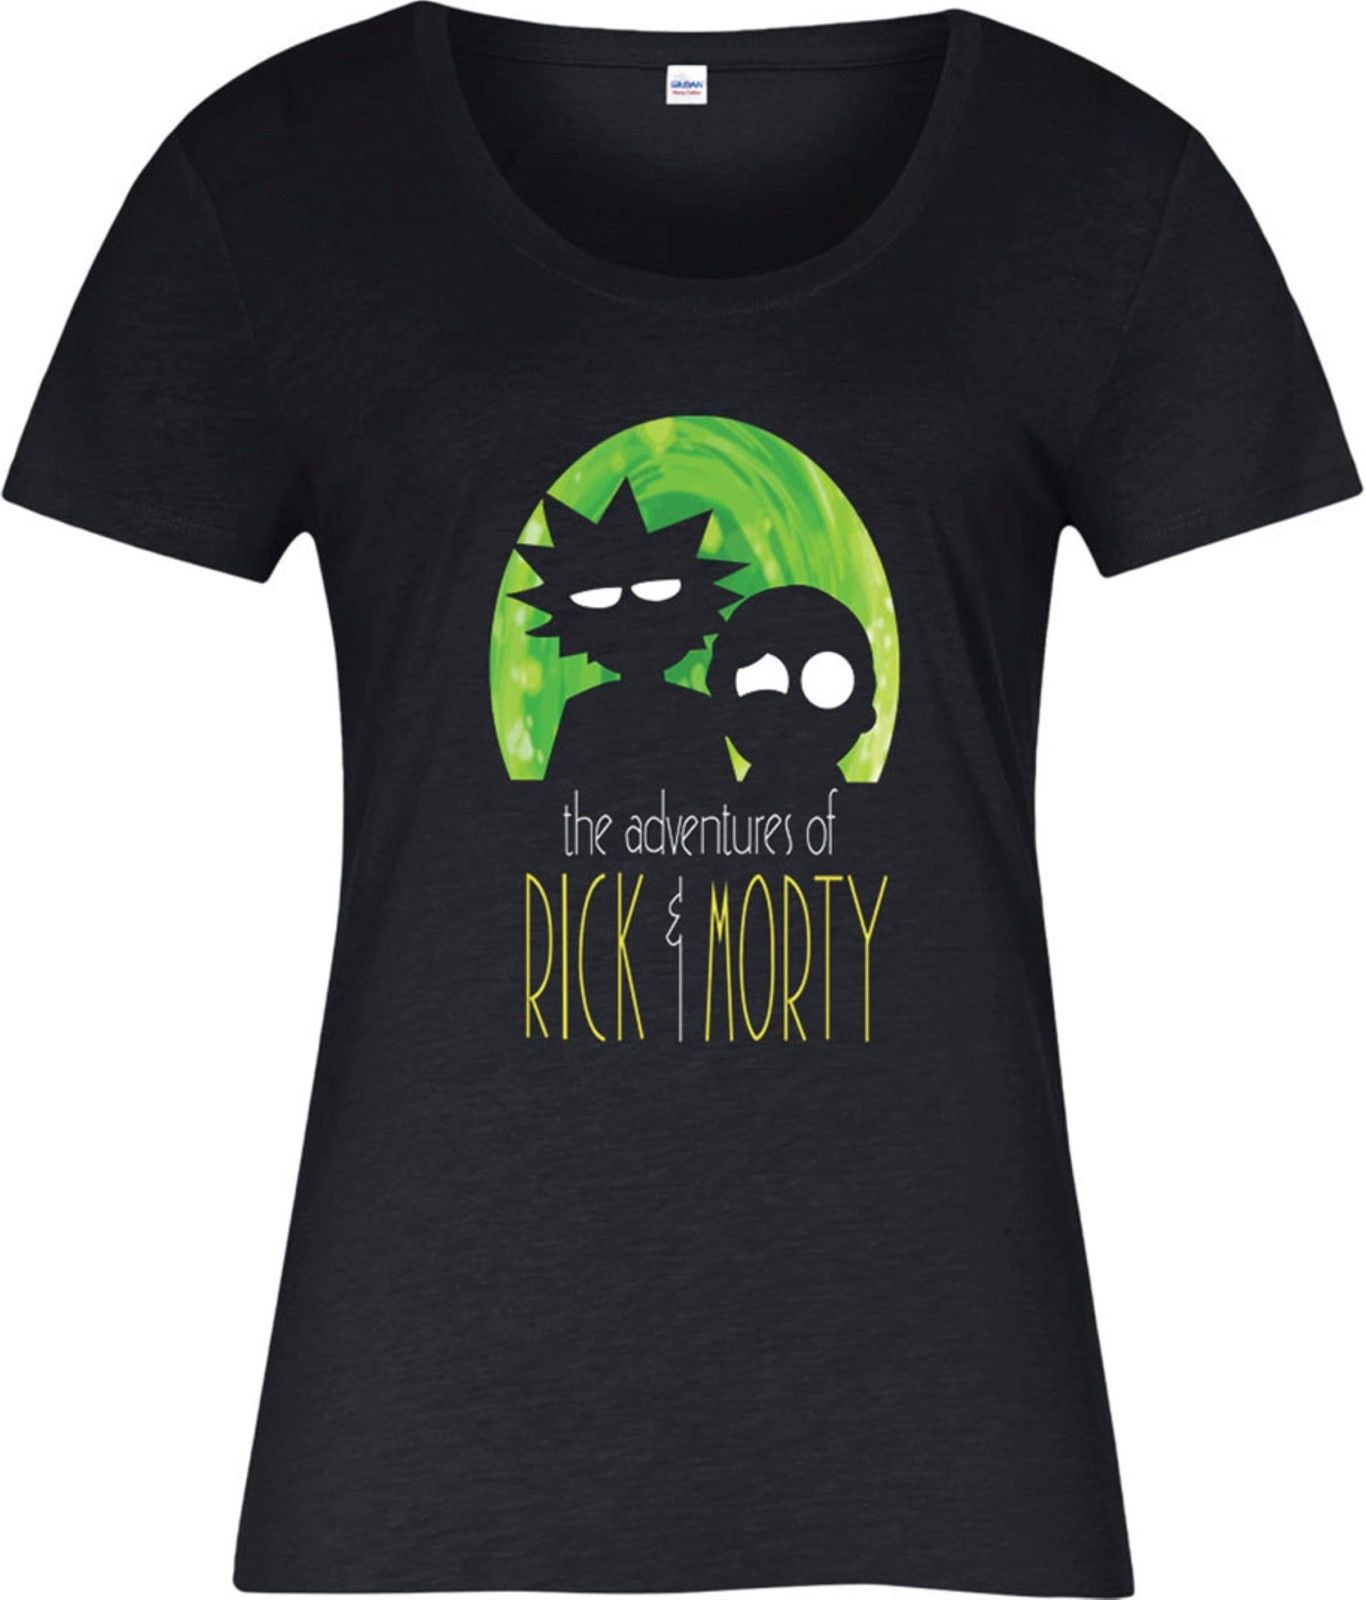 Extenders canada rick and morty ladies t shirt survive